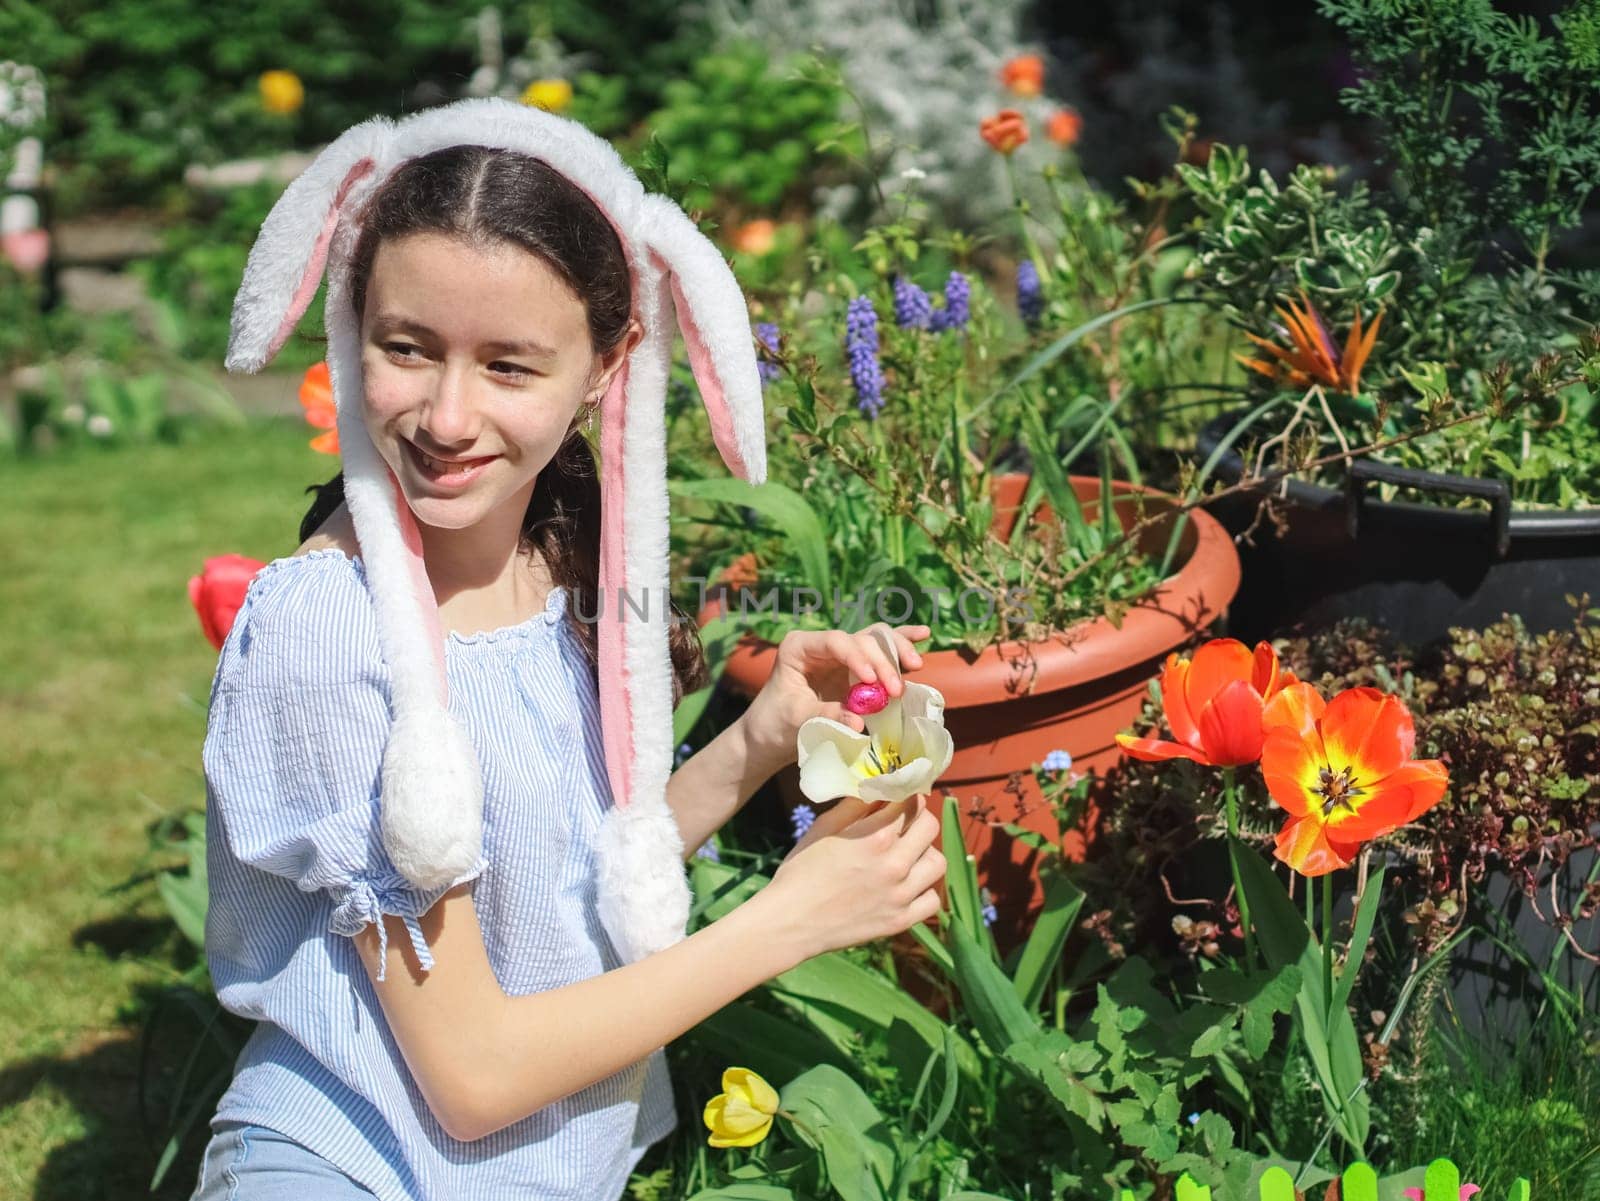 A caucasian teenage girl with a headband of bunny ears found a chocolate Easter egg in a bright lilac shiny wrapper in a white tulip while sitting on the lawn in the backyard of the house, close-up side view. Easter tradition concept, Easter celebration.